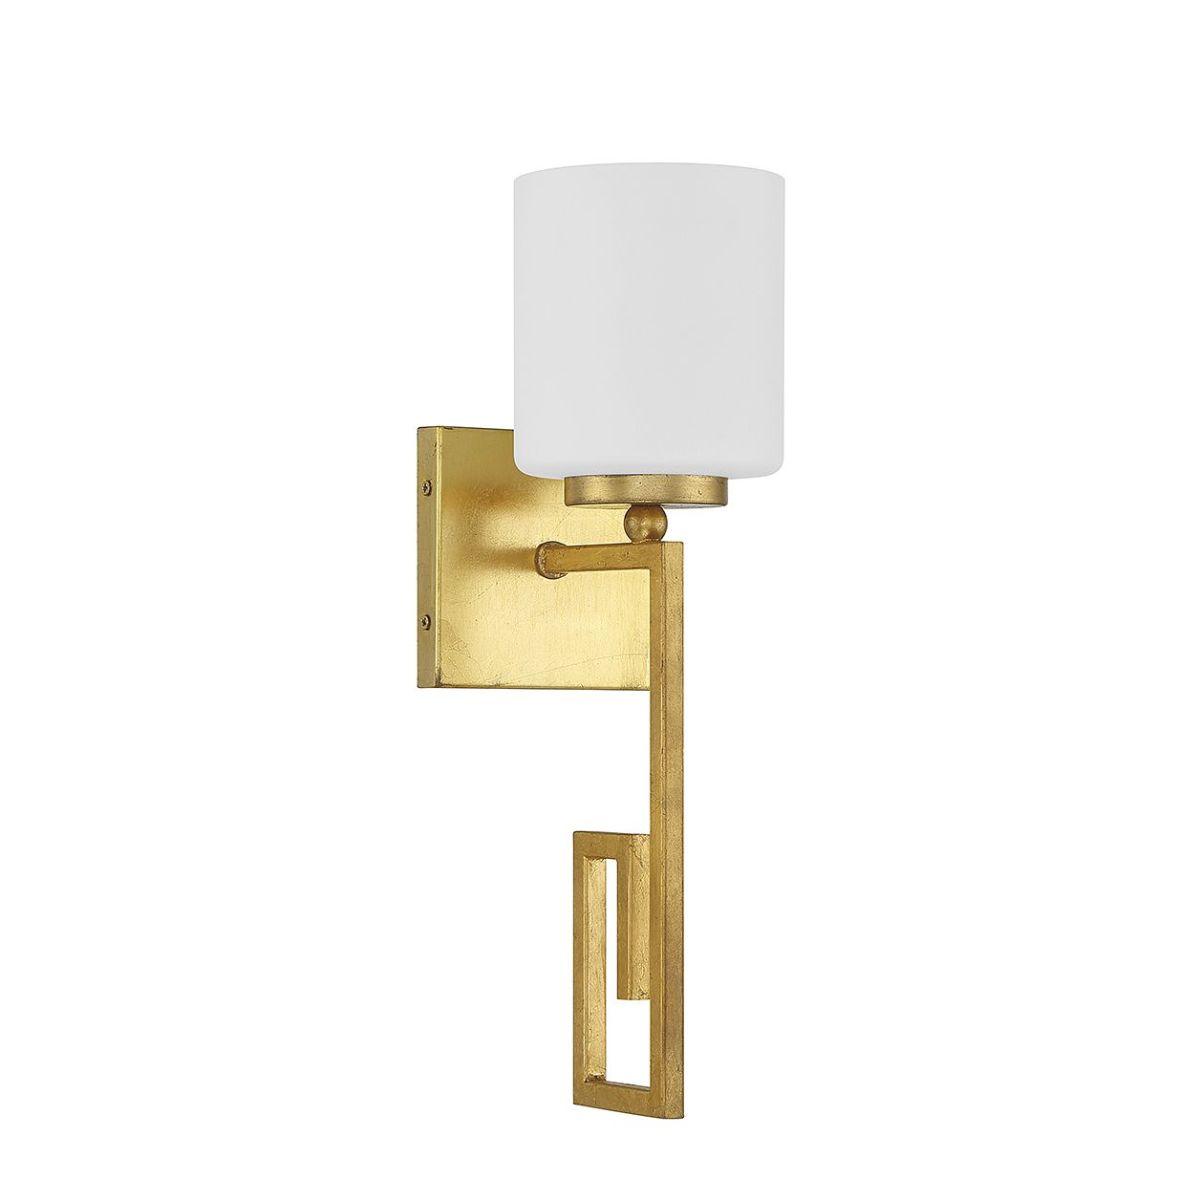 Quatrain 16 in. Armed Sconce Gold Finish